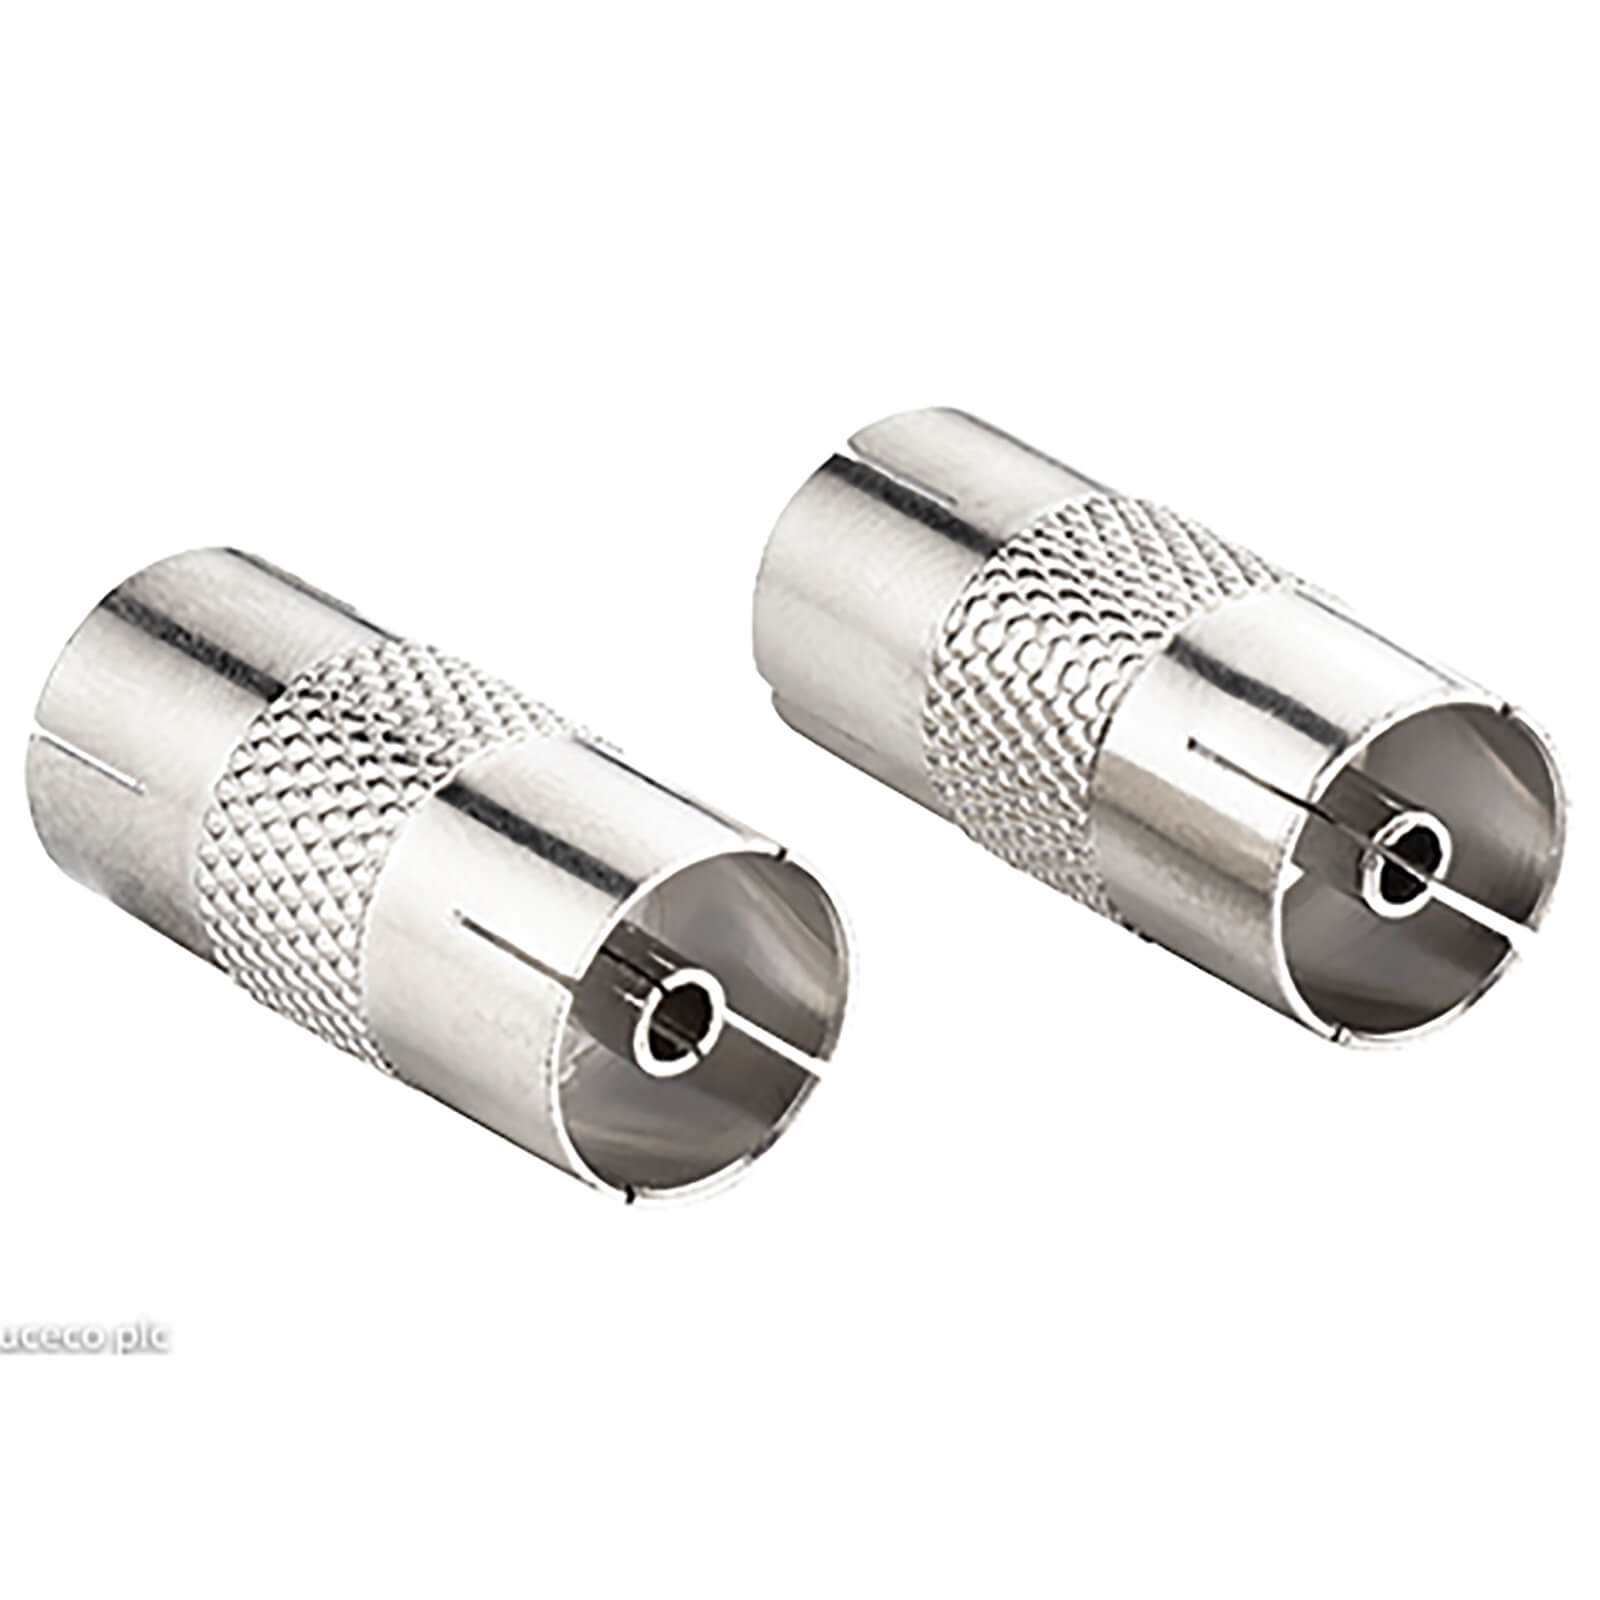 Ross Coaxial Aerial Cable Couplers Nickel 2 Pack